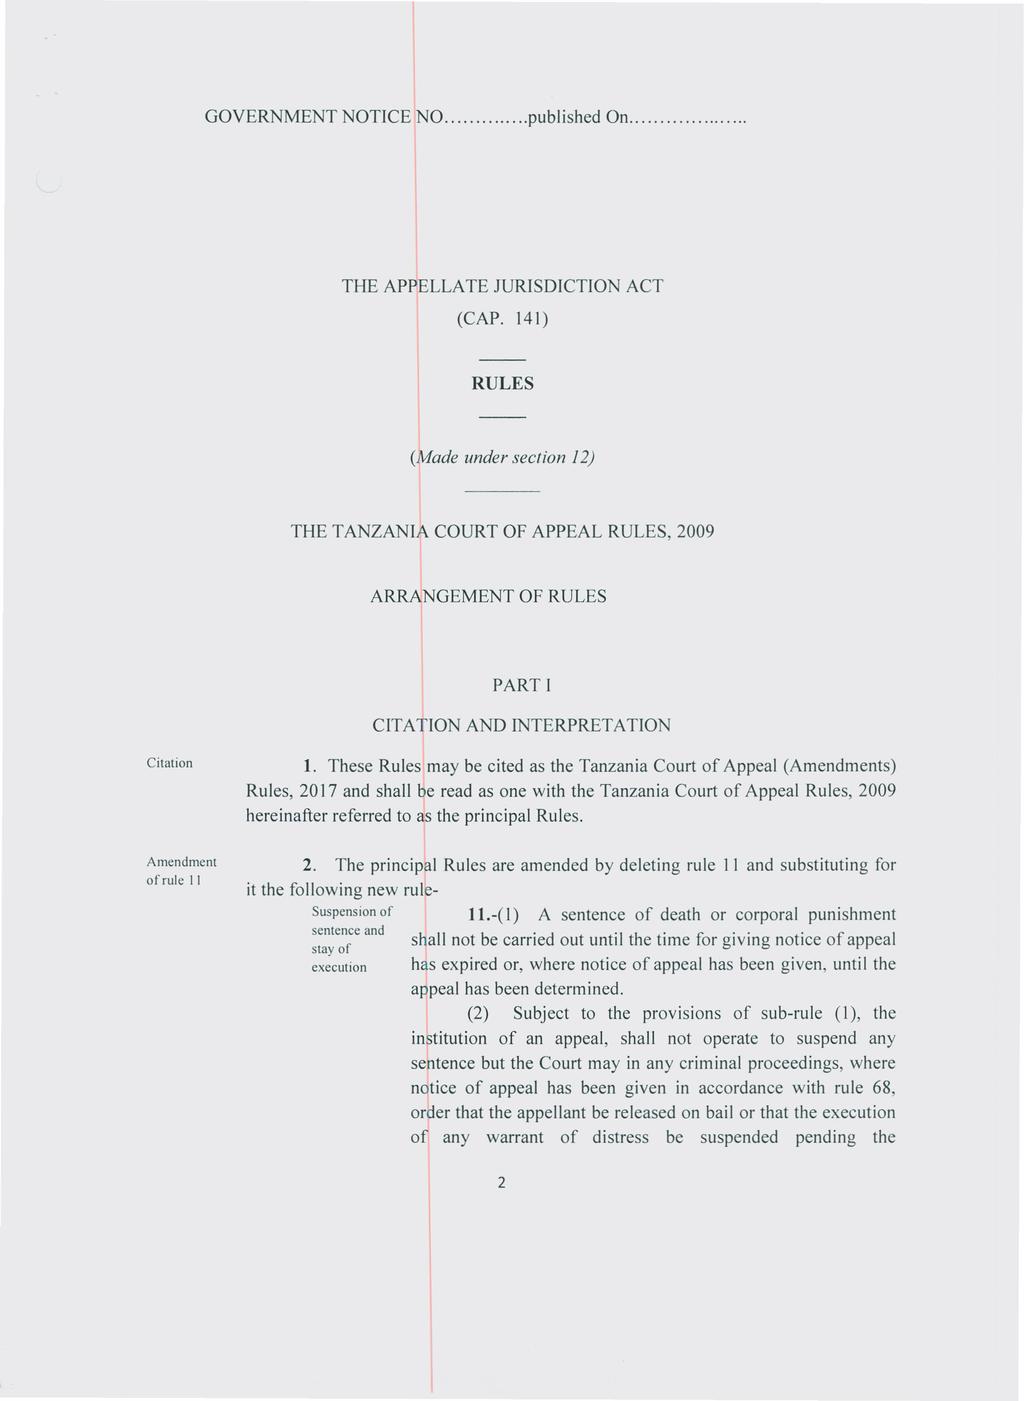 GOVERNMENT NOTICE NO published On. THE APPELLATE JURISDICTION ACT (CAP.